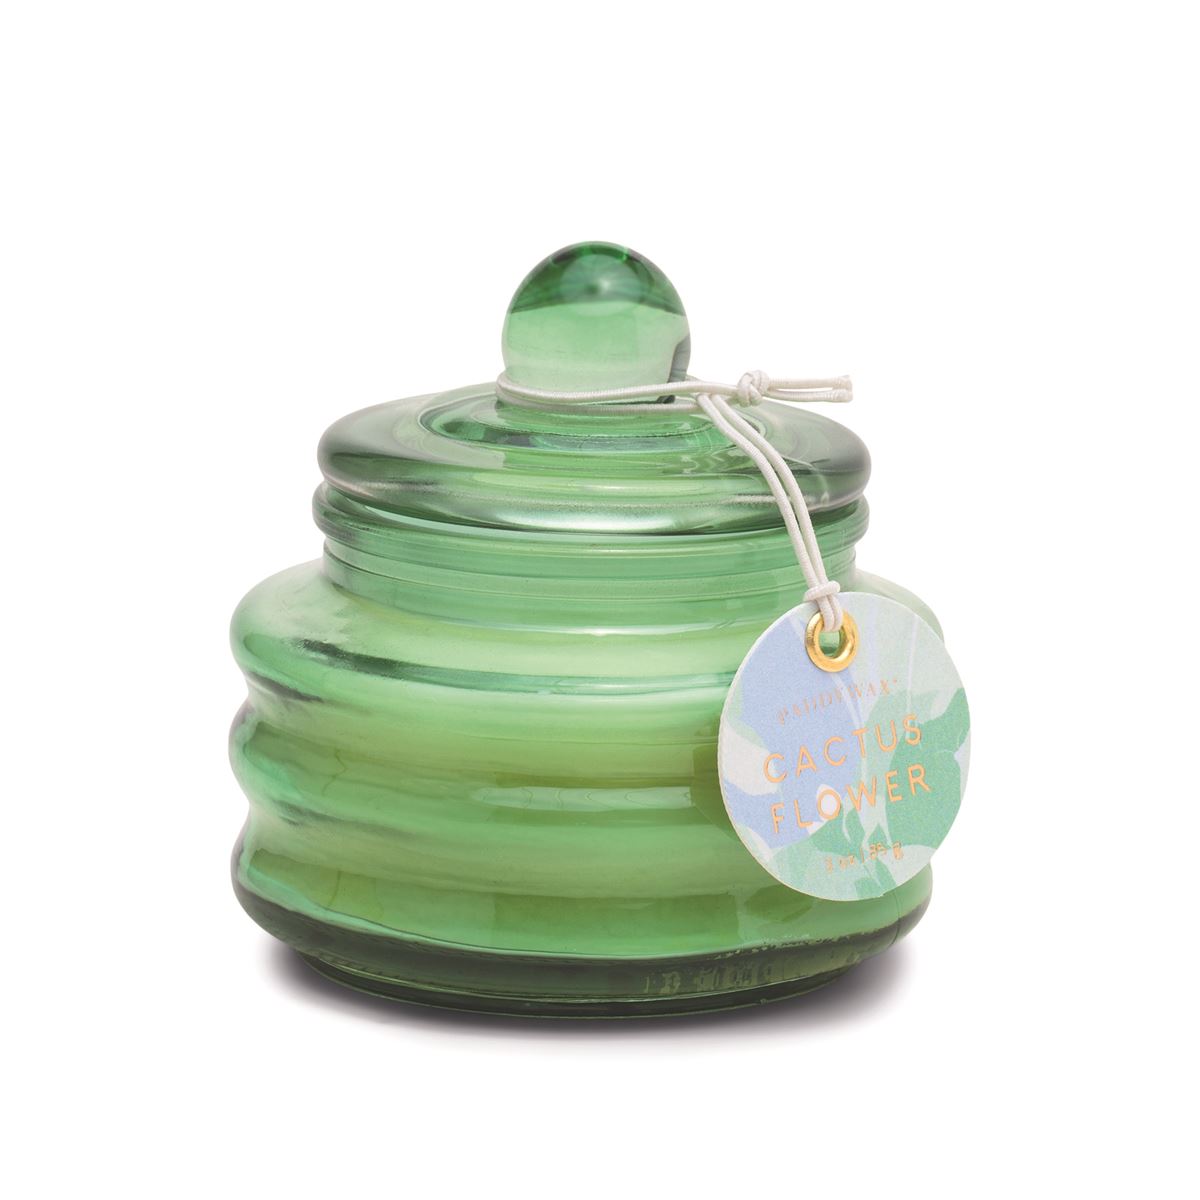 Beam 3oz Green Small Glass Vessel and Lid - Cactus Flower